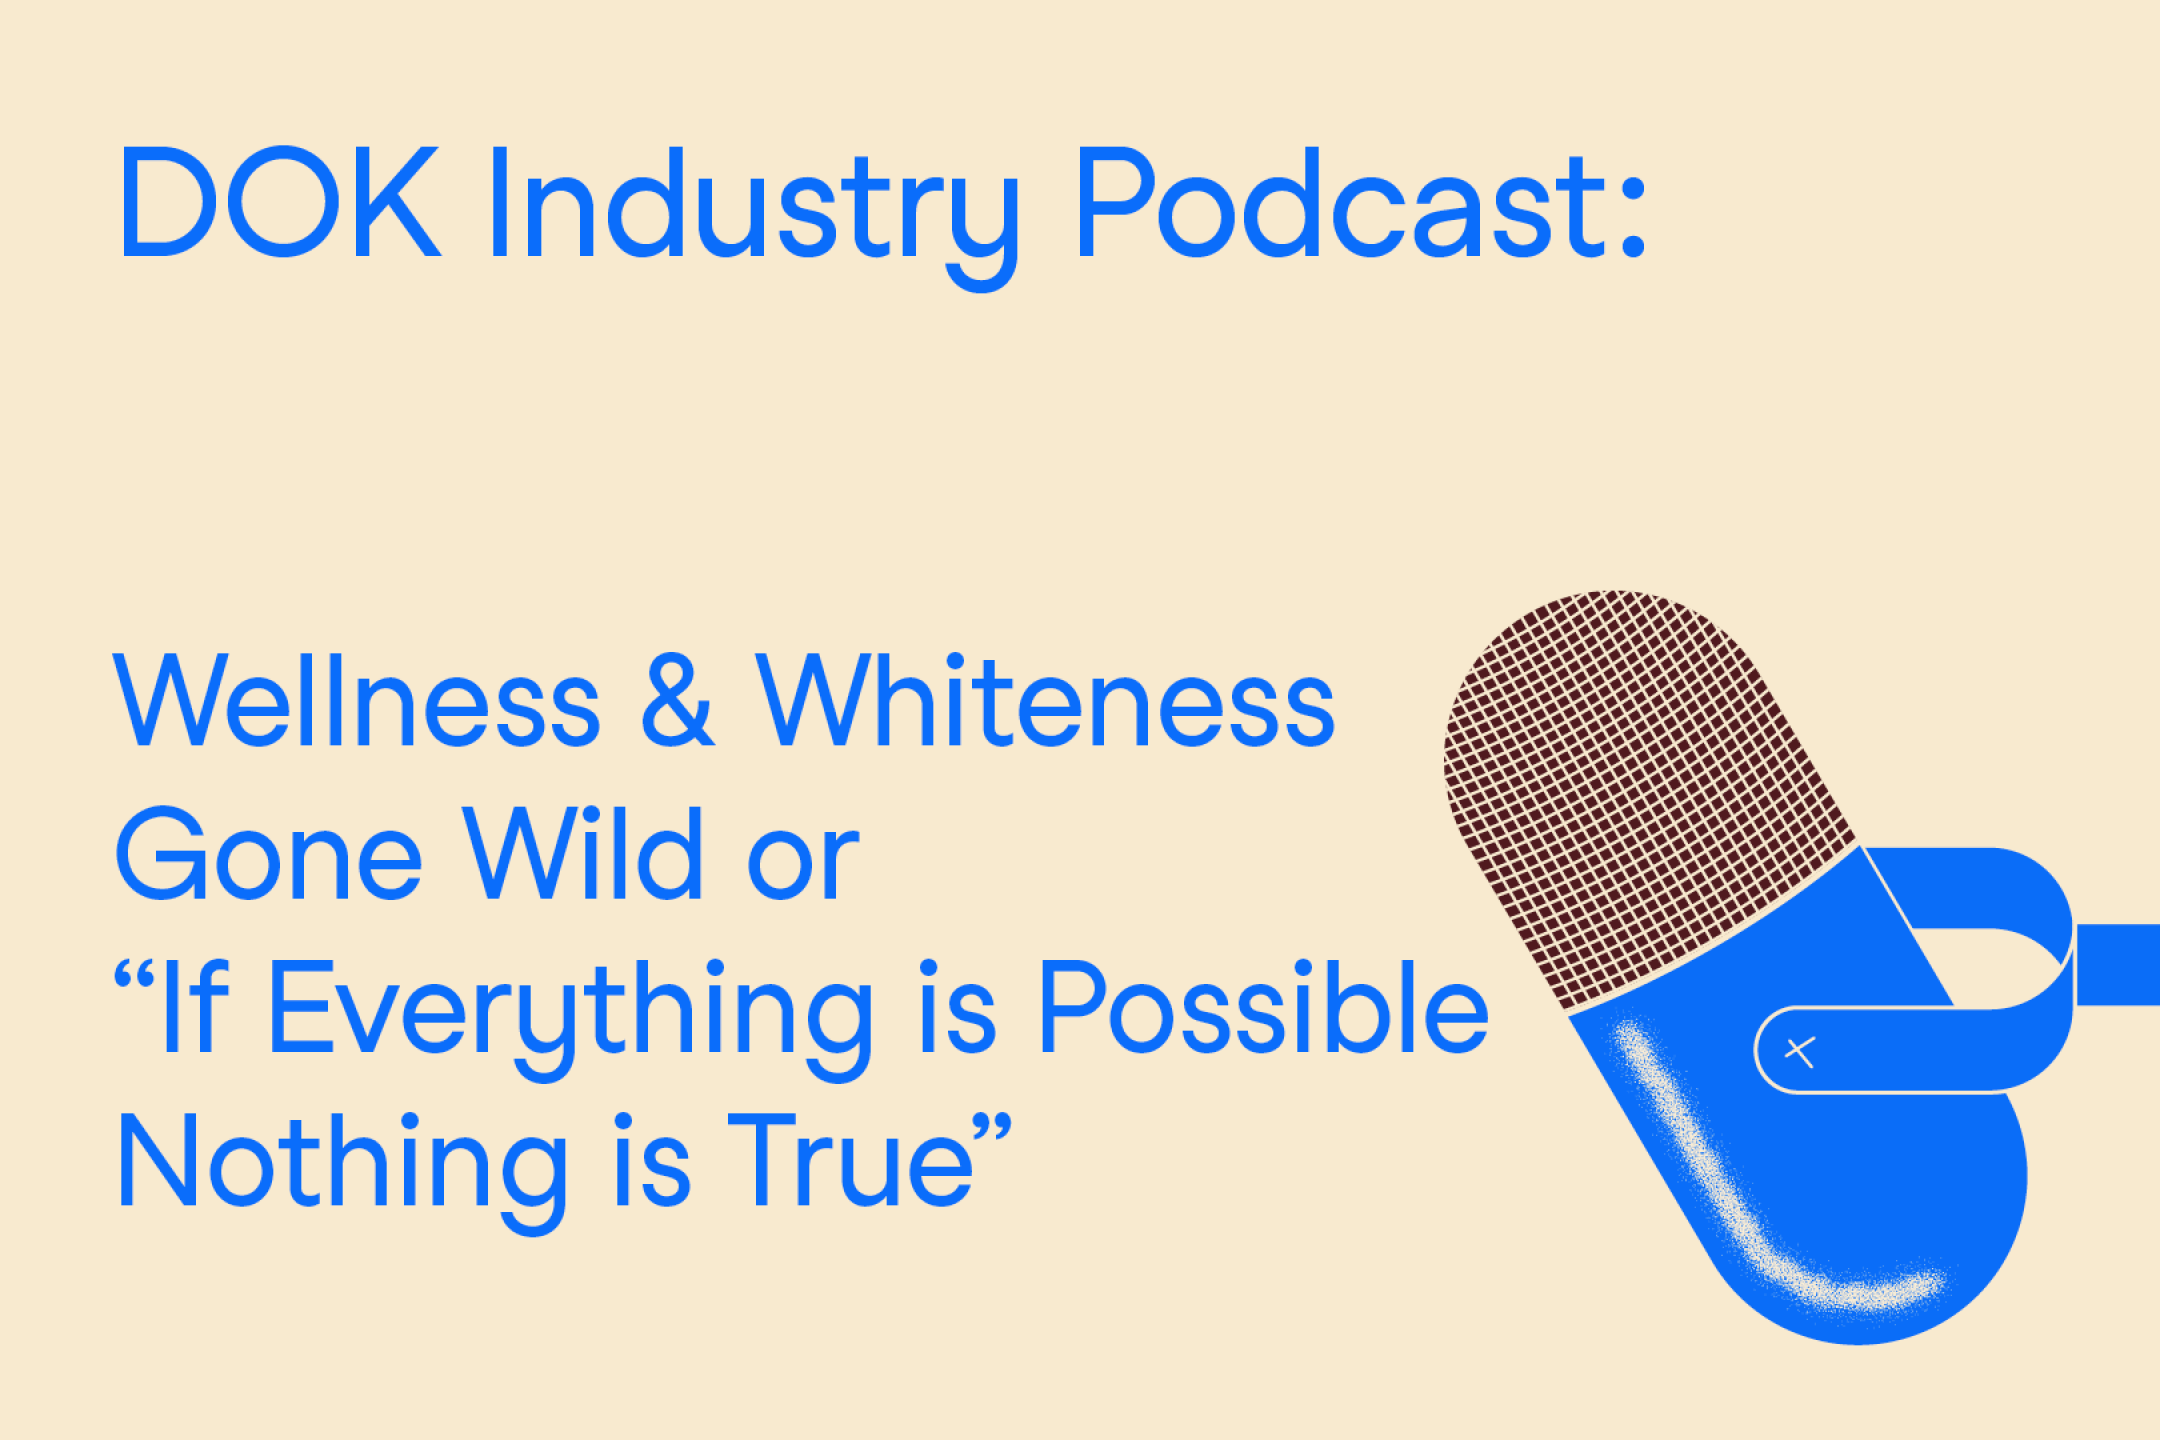 A text graphic with blue letters on a yellow background. At the right the illustration of a microphone. At the left the text: “Dok Industry Podcast: Wellness & Whiteness Gone Wild”